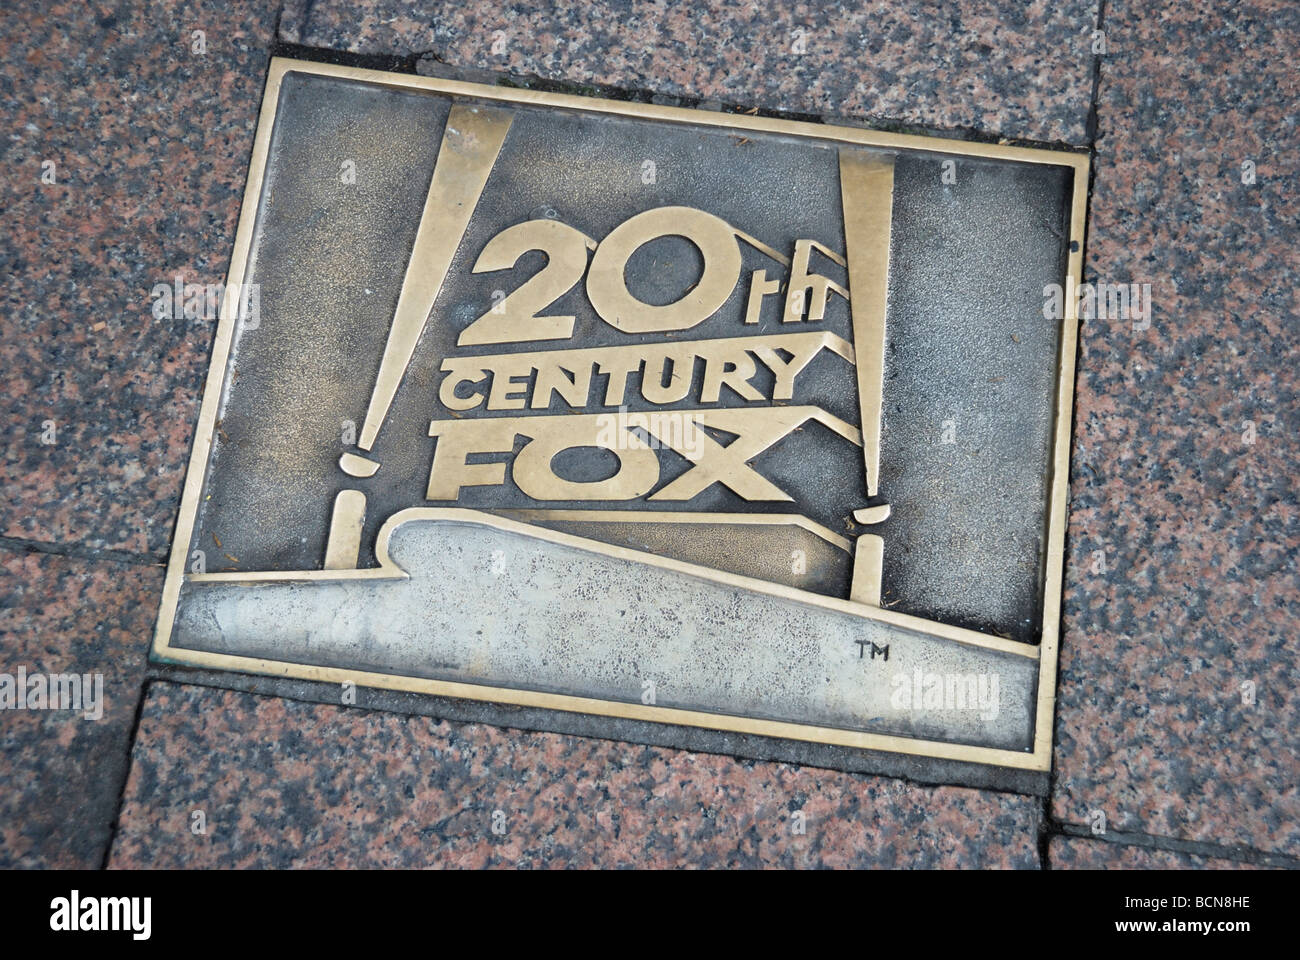 20th Century Fox film company logo on pavement in Leicester Square London Stock Photo